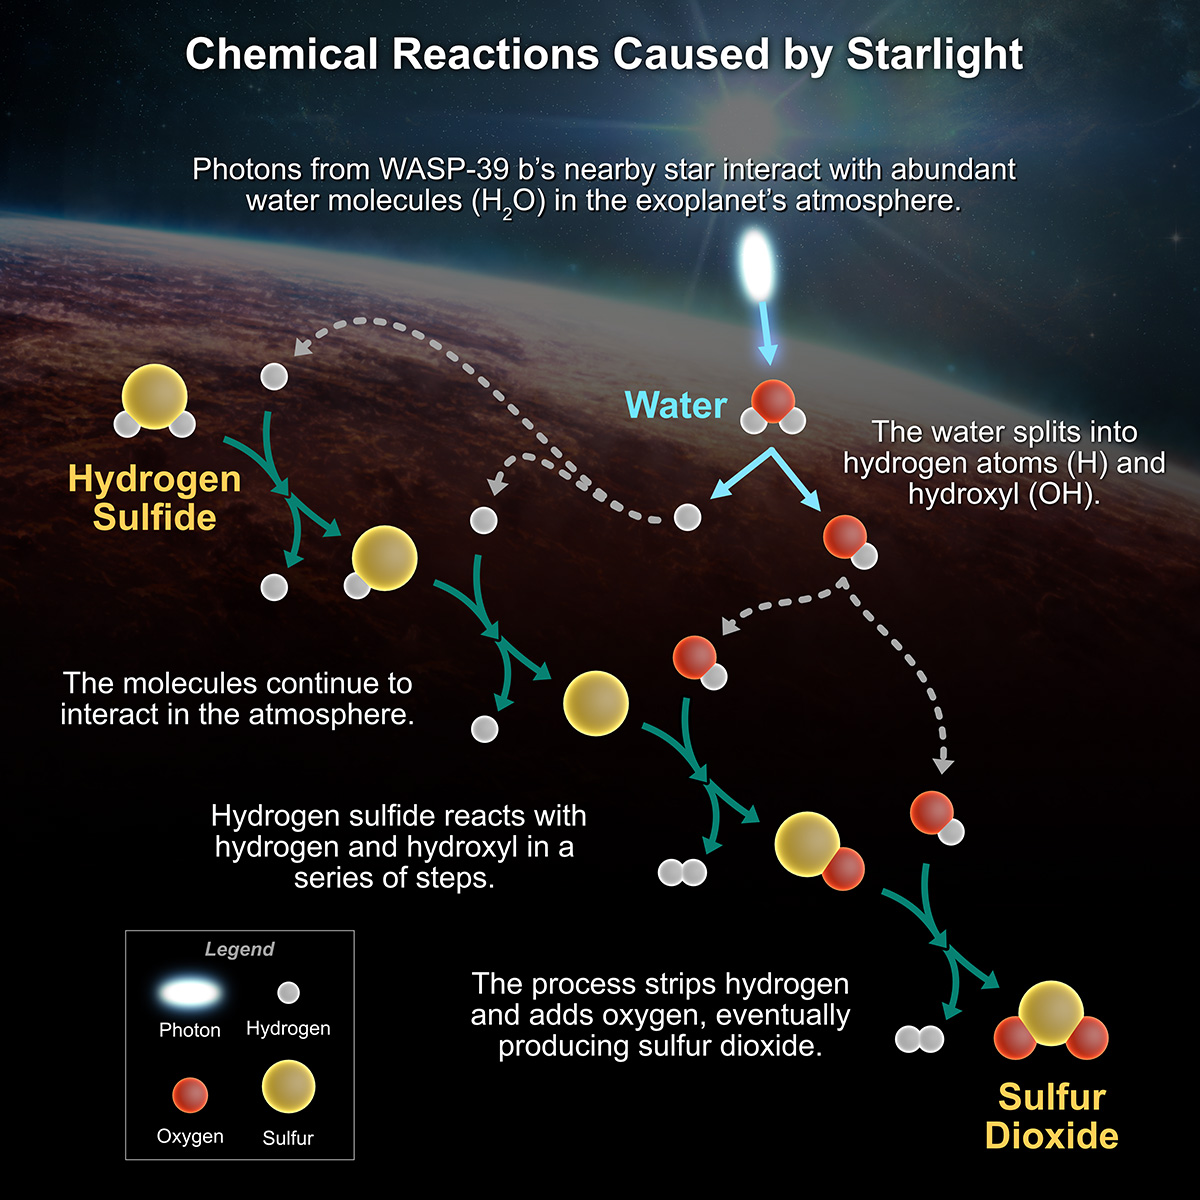 An infographic is headlined, Chemical Reactions Caused by Starlight. It shows an illustration of the surface of a reddish exoplanet beneath its star. Light from the star shines into the chemical reaction portrayed in the graphic. Here, you can see molecules interacting and forming new compounds.
Photons from WASP-39 b’s nearby star interact with abundant water molecules (H2O) in the exoplanet’s atmosphere.
The water splits into hydrogen atoms (H) and hydroxide (OH).
The molecules continue to interact in the atmosphere.
Hydrogen sulfide reacts with hydrogen and hydroxide in a series of steps. The process strips hydrogen and adds oxygen, eventually producing sulfur dioxide.